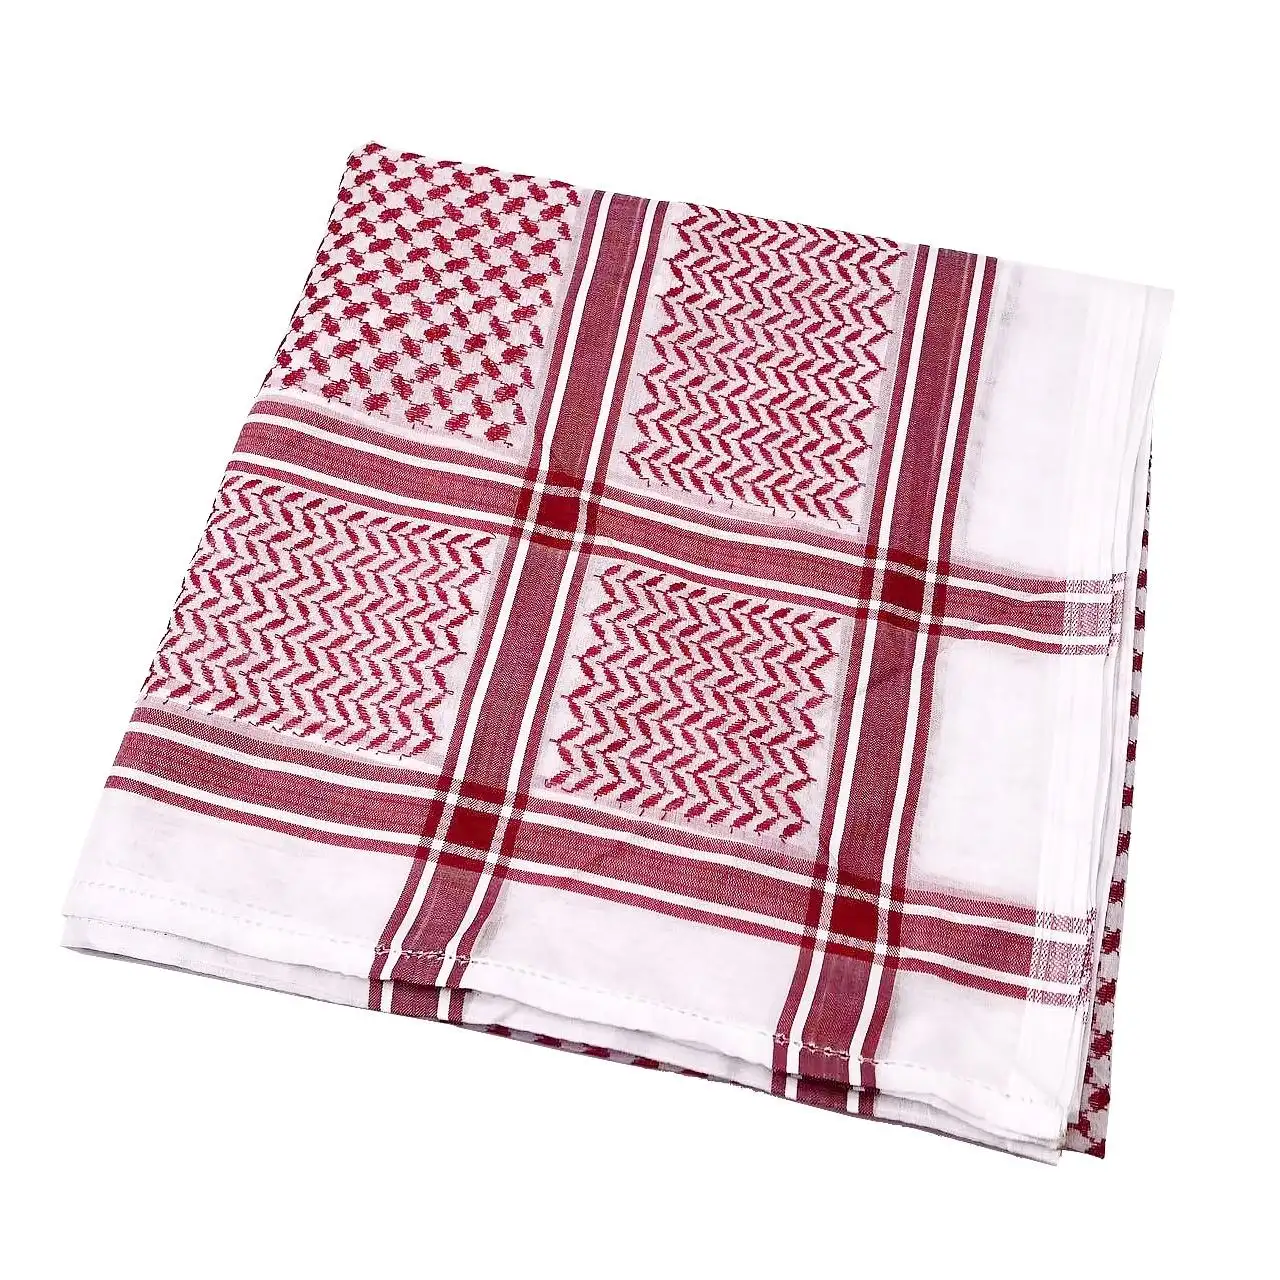 100% Cotton New Muslim Arabic Style Yashmagh Red Scarf Shenmagh Dubai Saudi Men's Cotton Strong Square Hijab Scarf